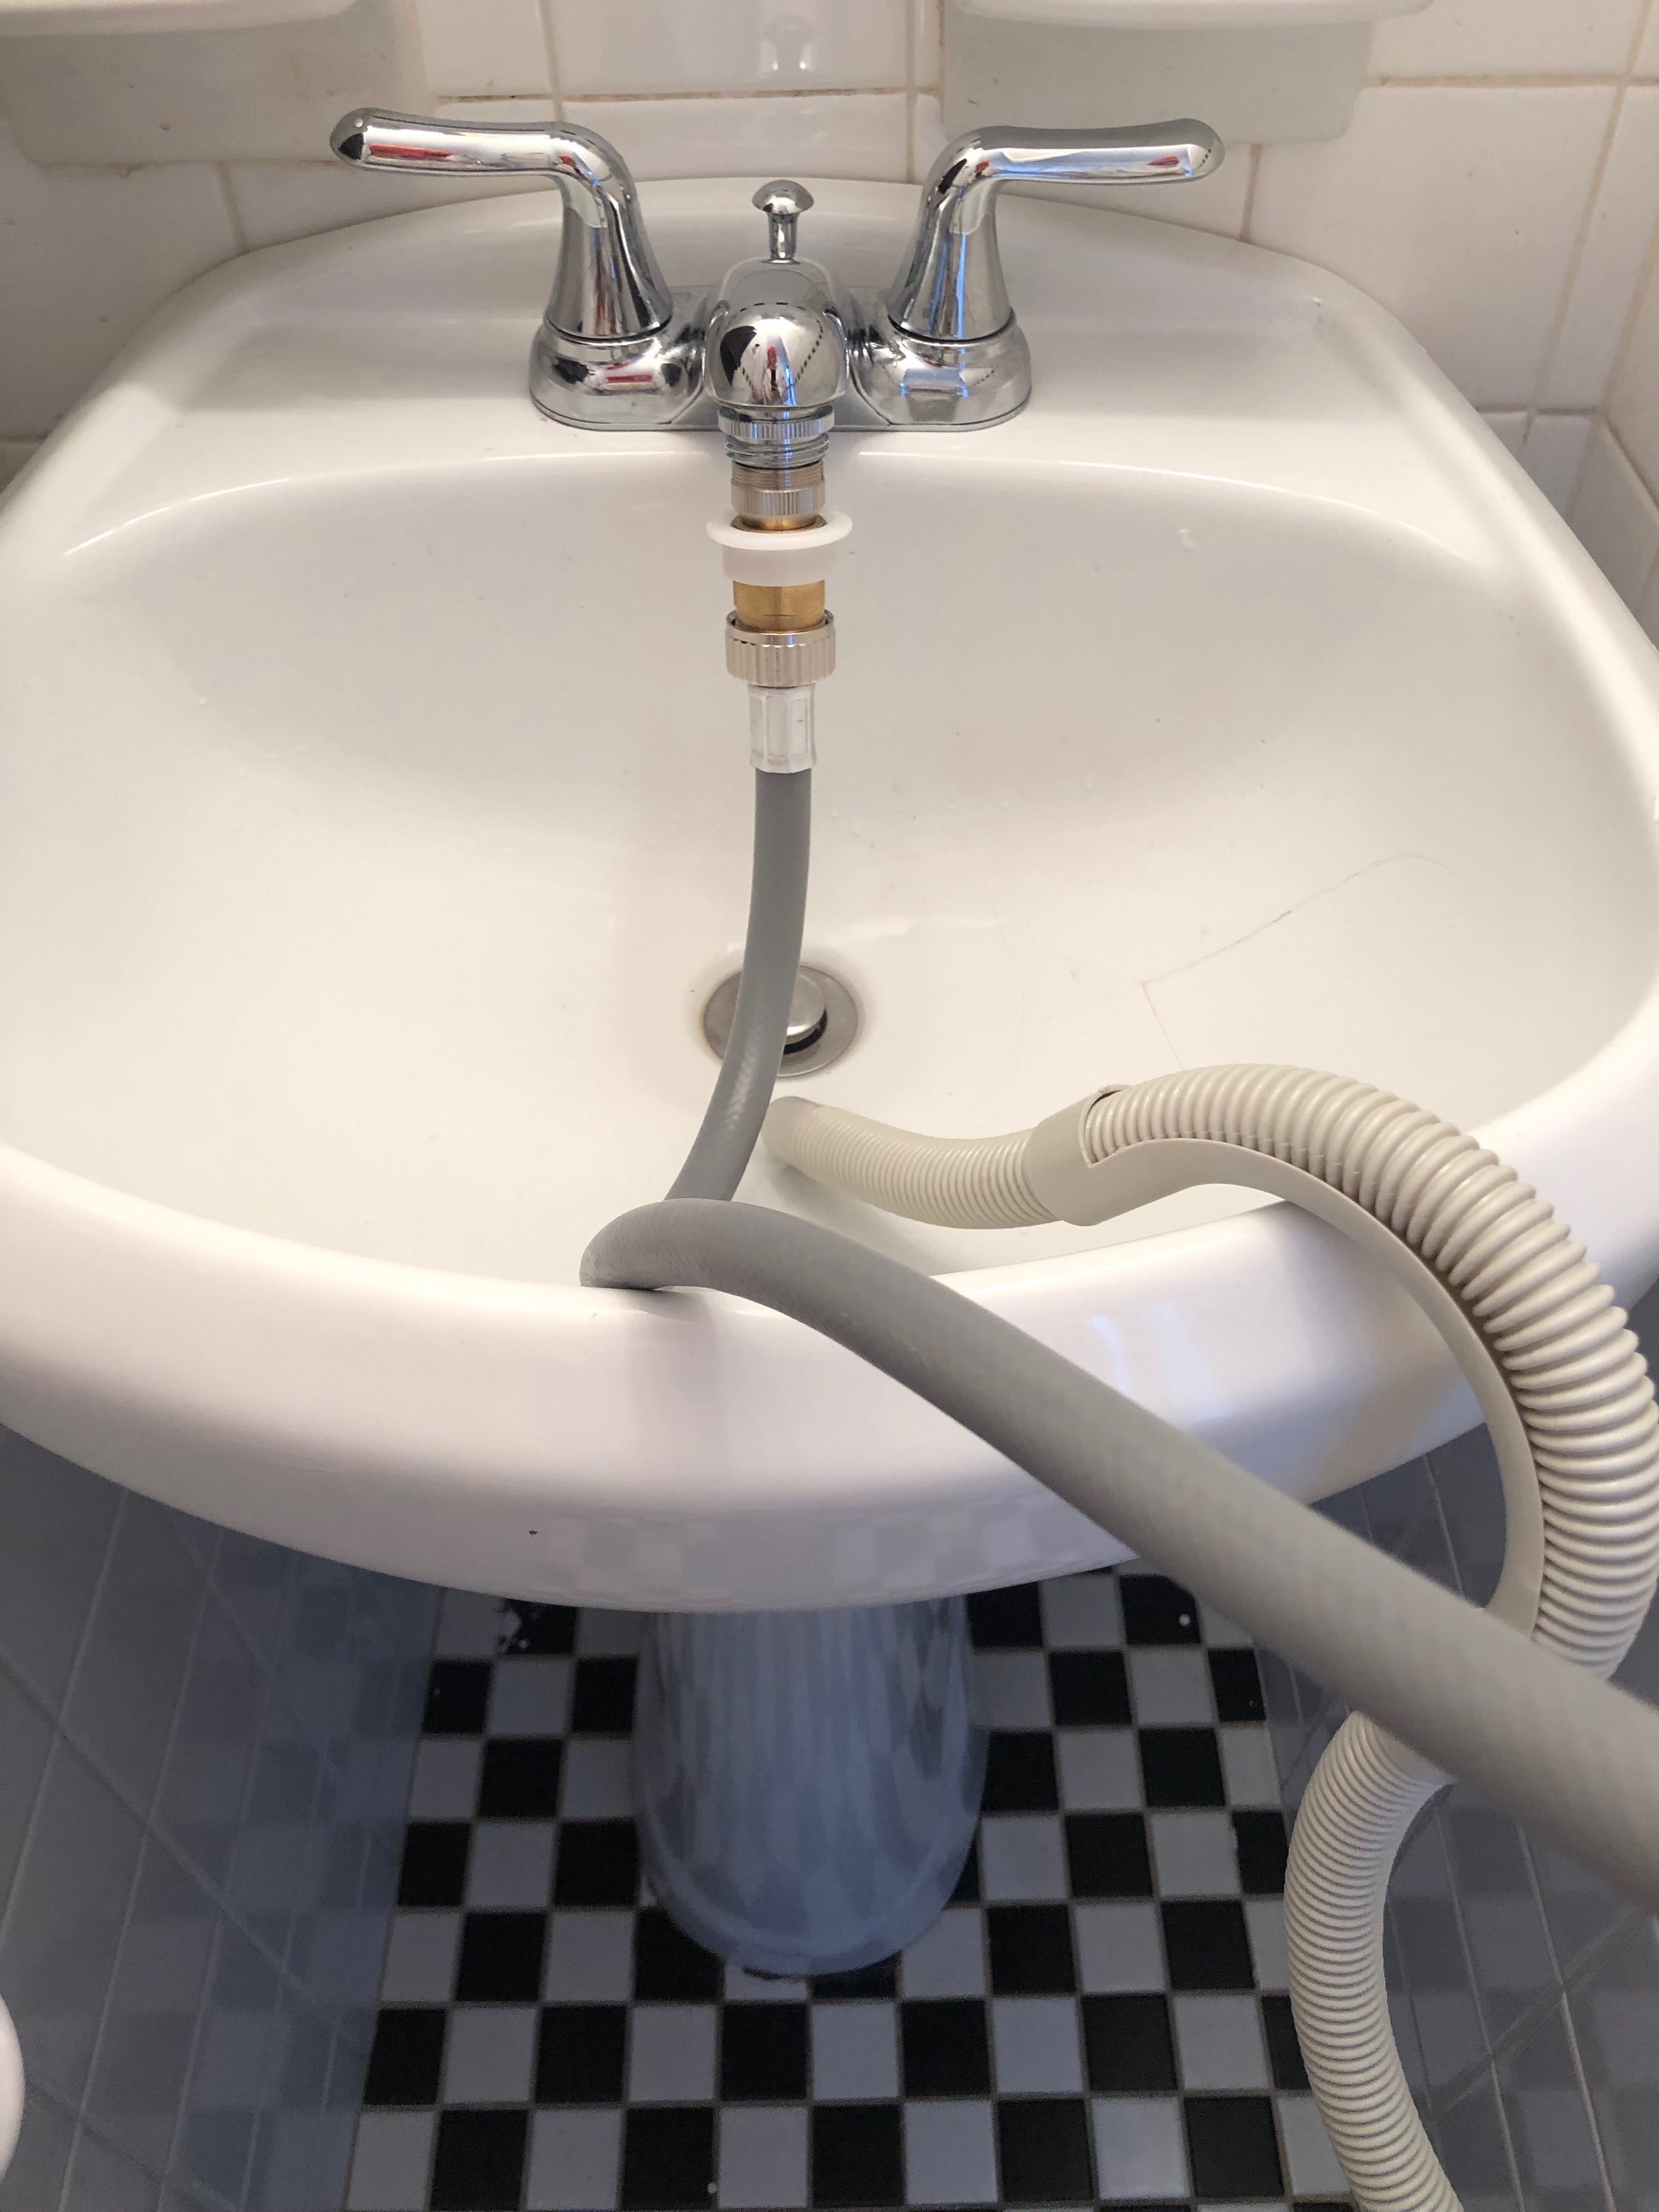 portable washer connect to sink.